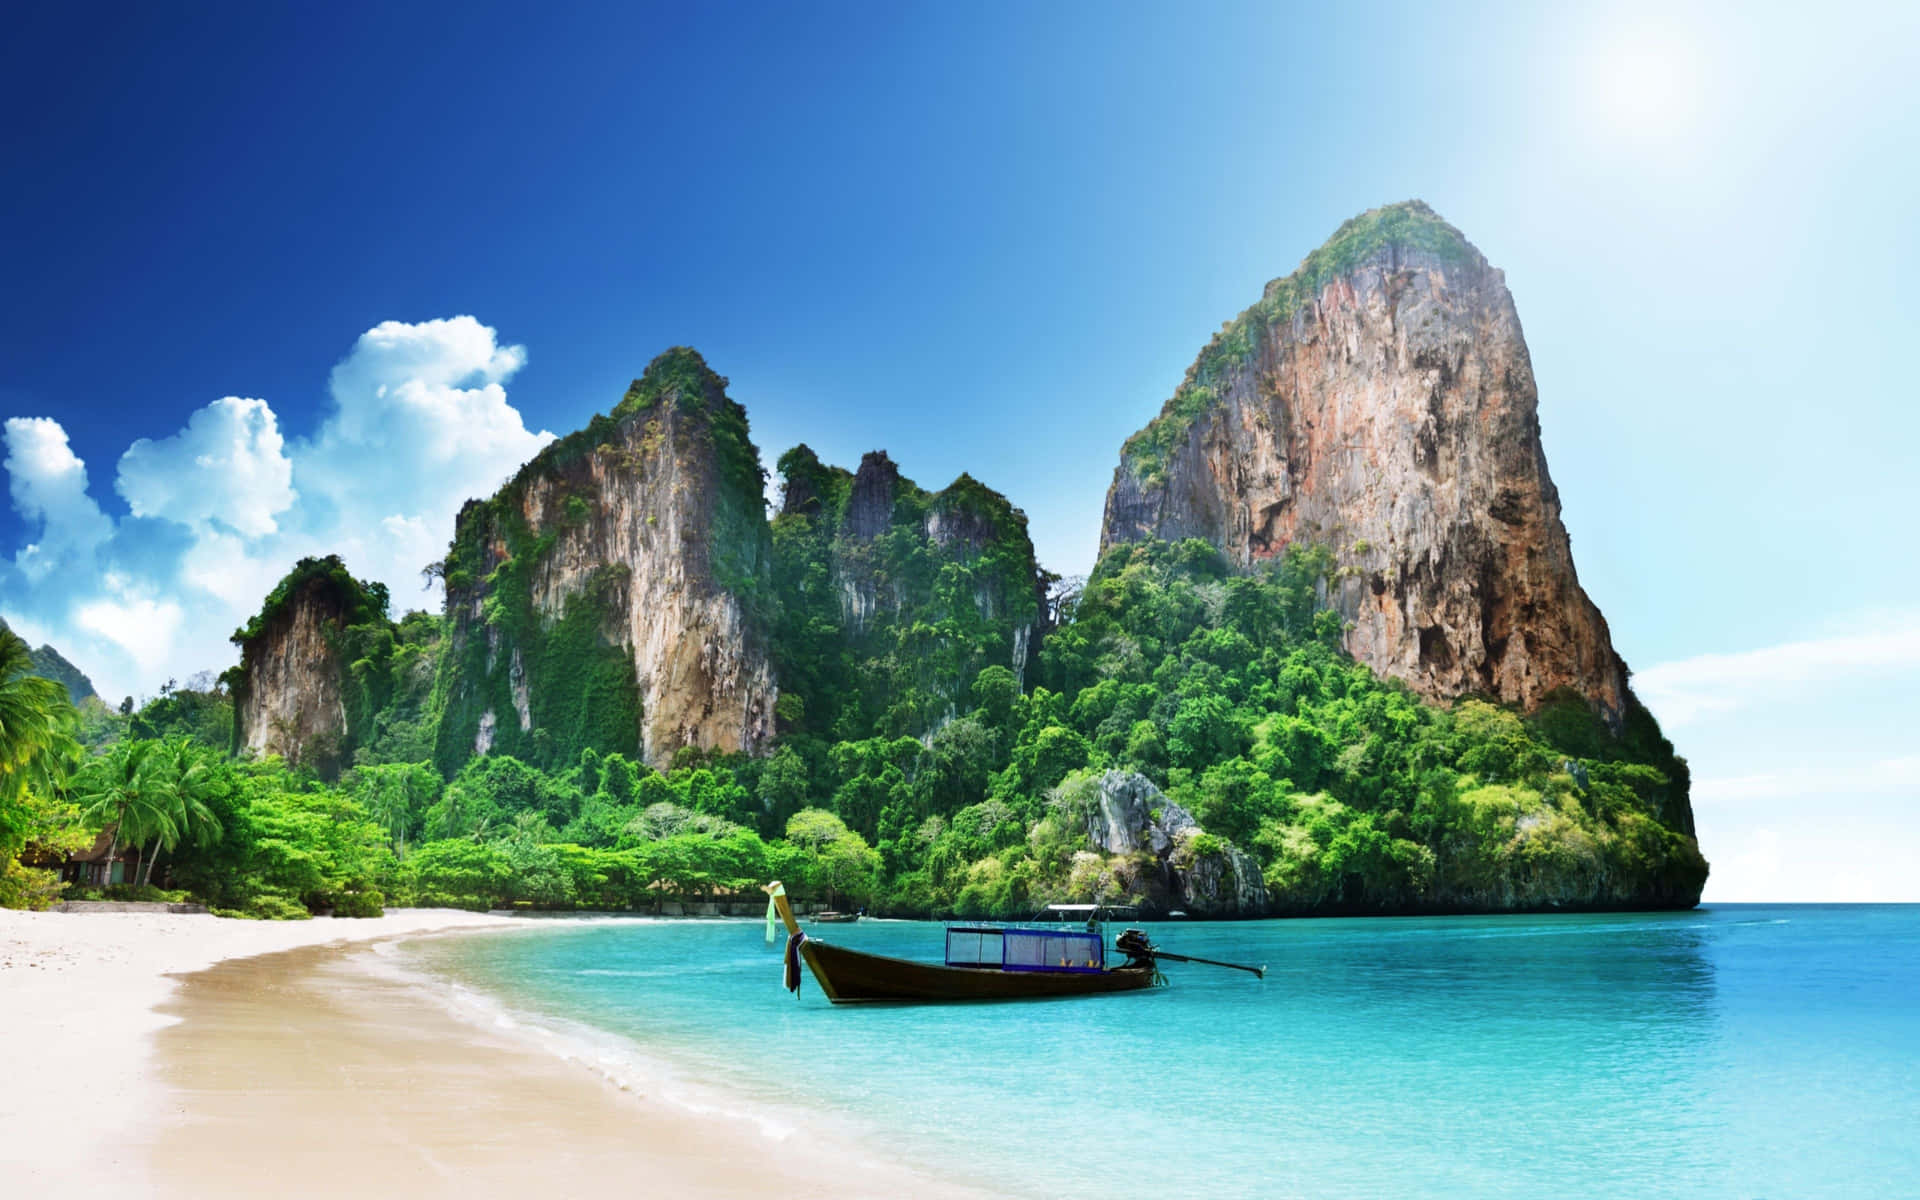 Take in the beauty of Thailand